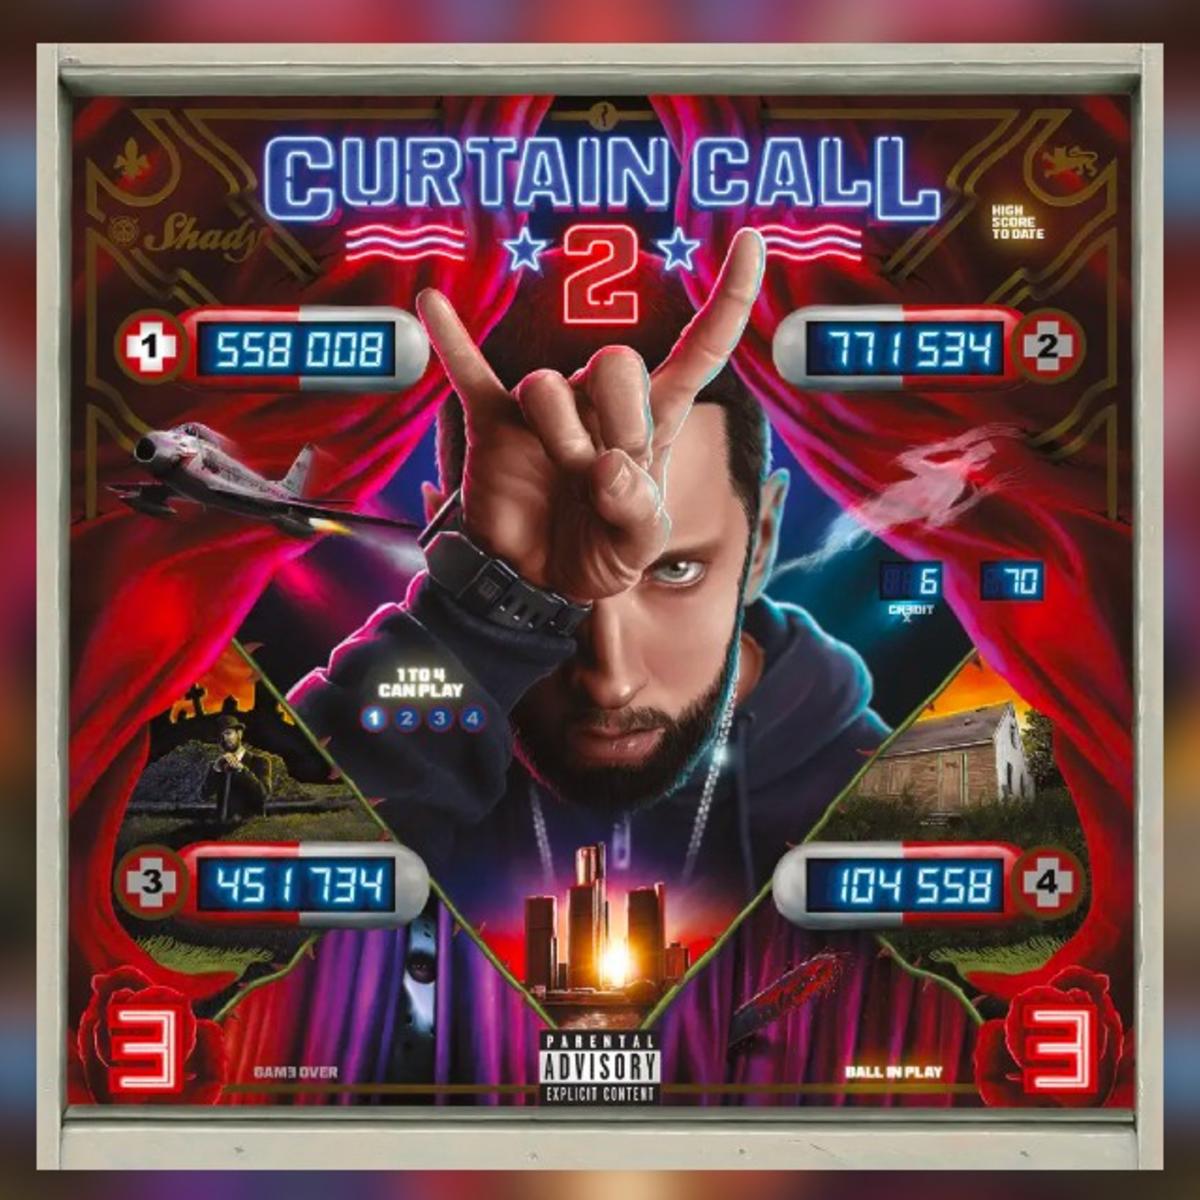 Listen To “Curtain Call 2” By Eminem